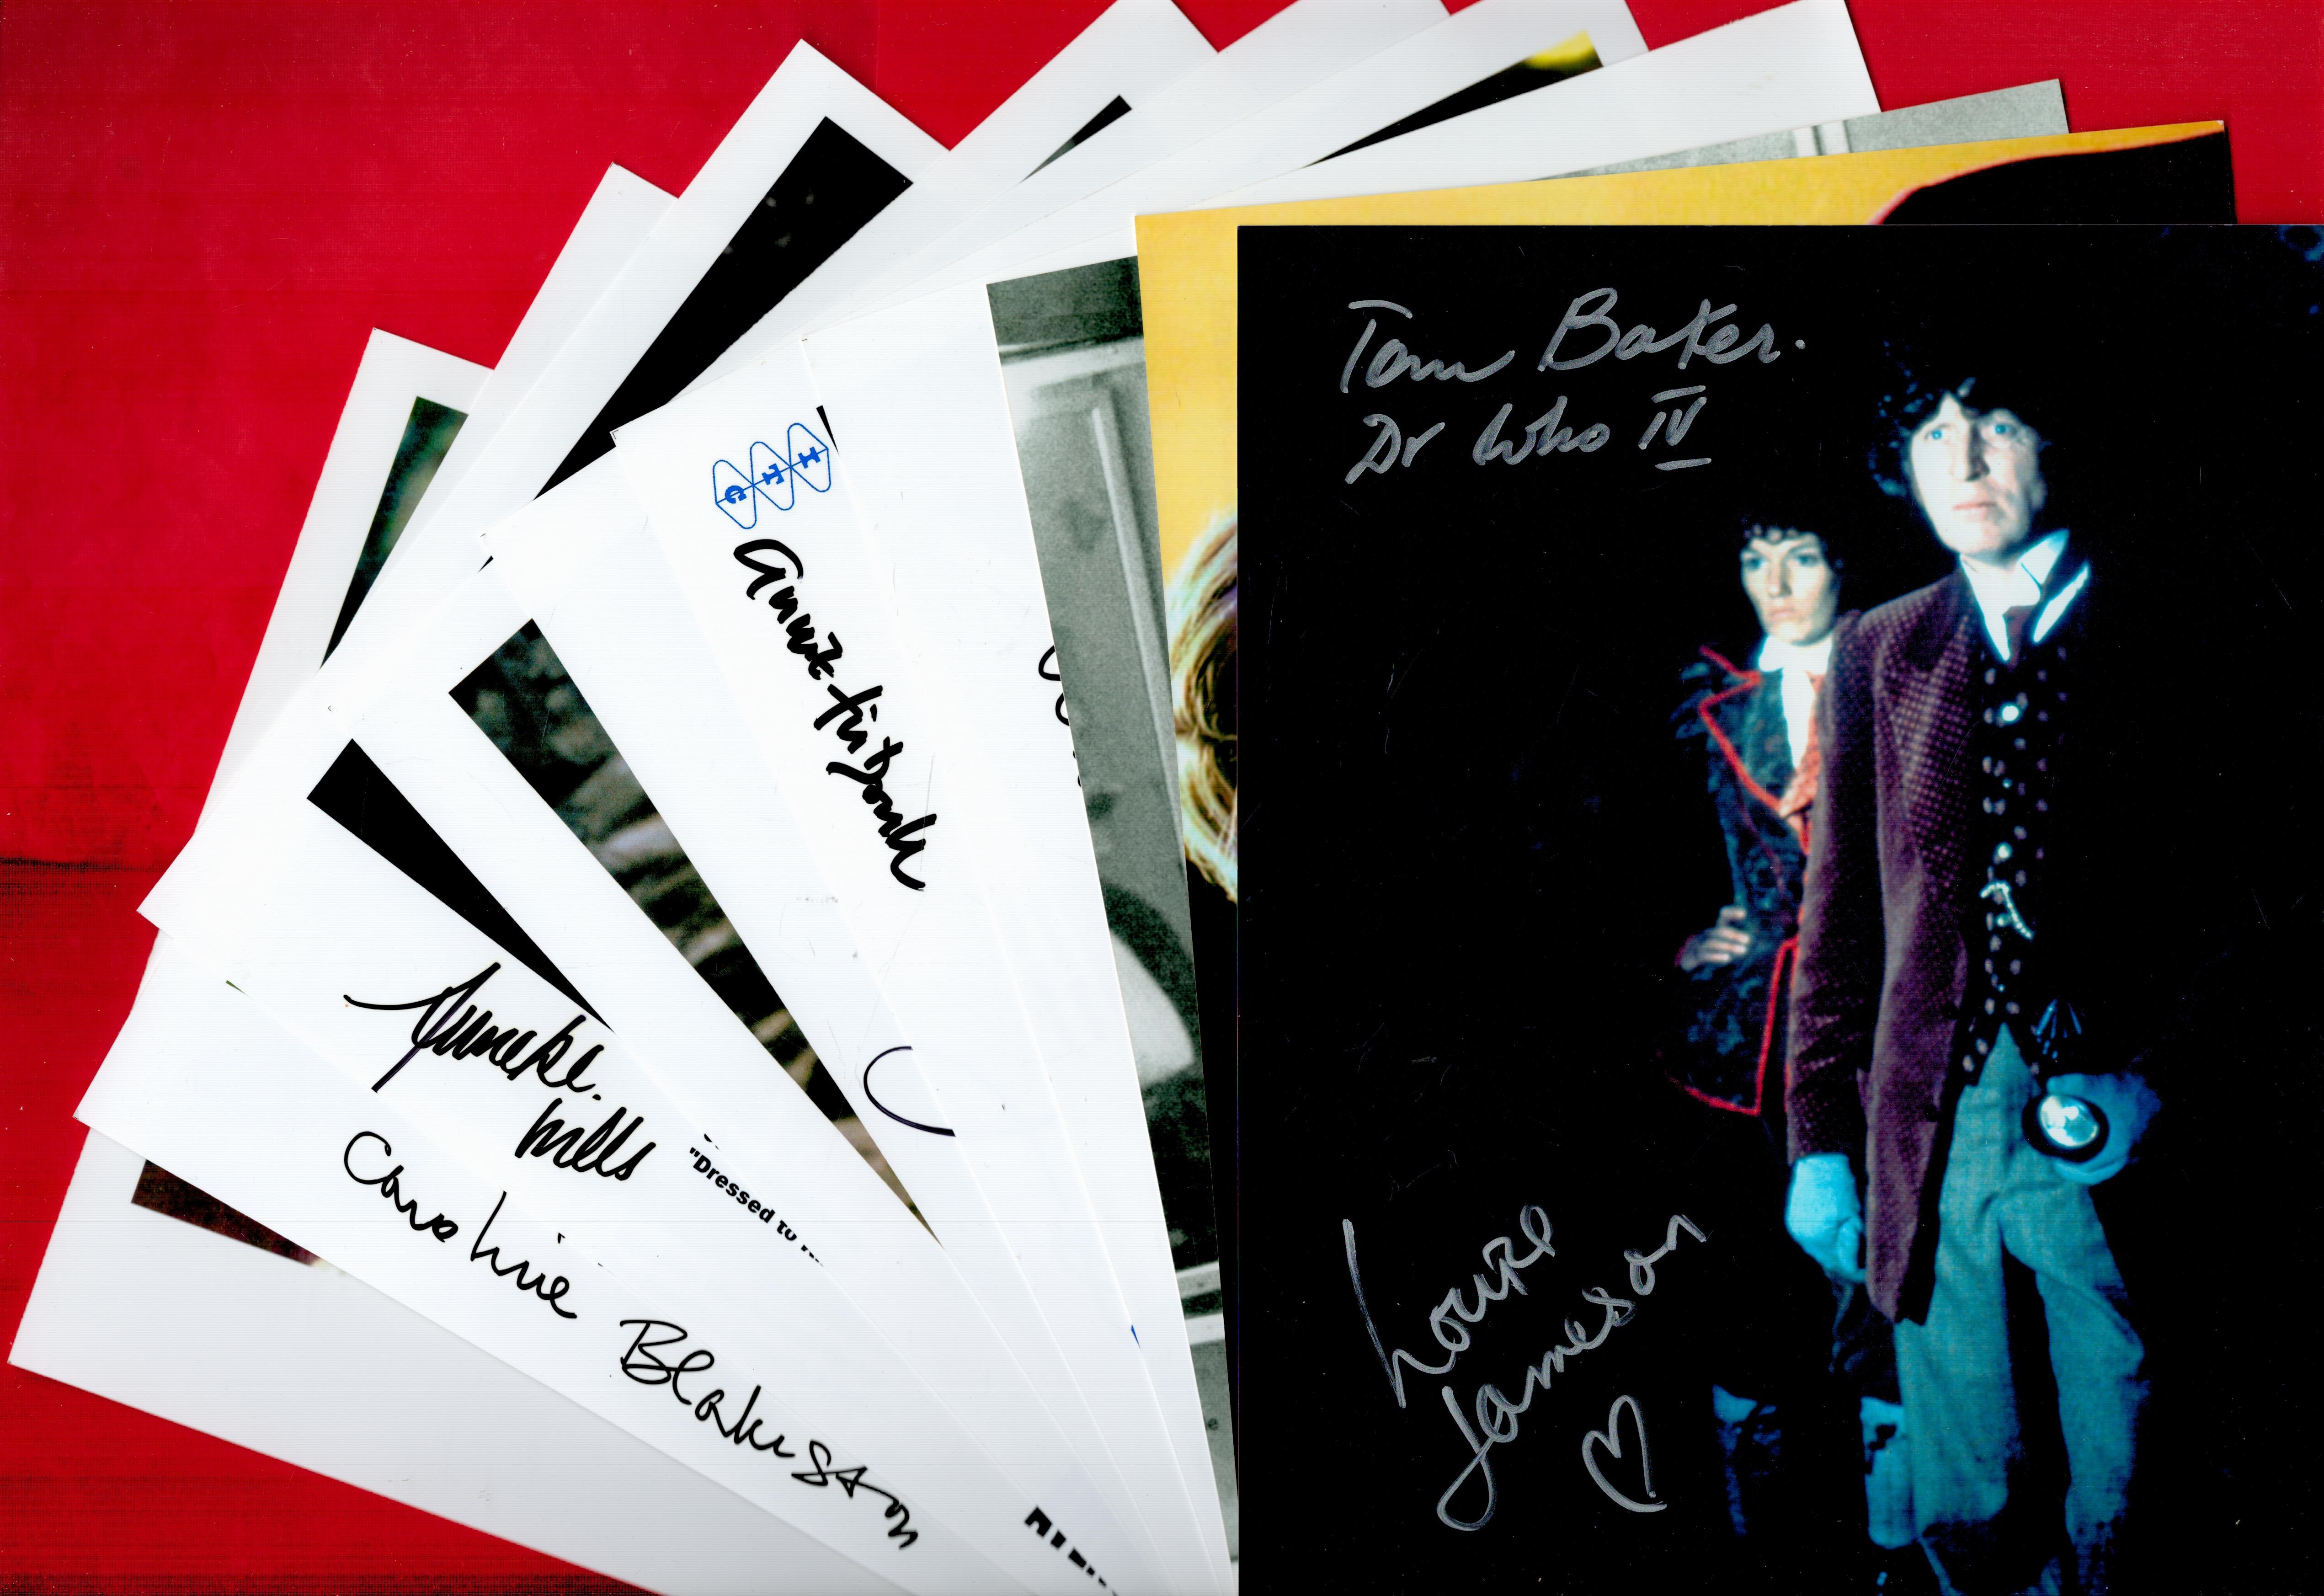 Films & TV Collection of 10 Signed photos approx size 8 x 10 includes Tom Baker & Louise Jameson,